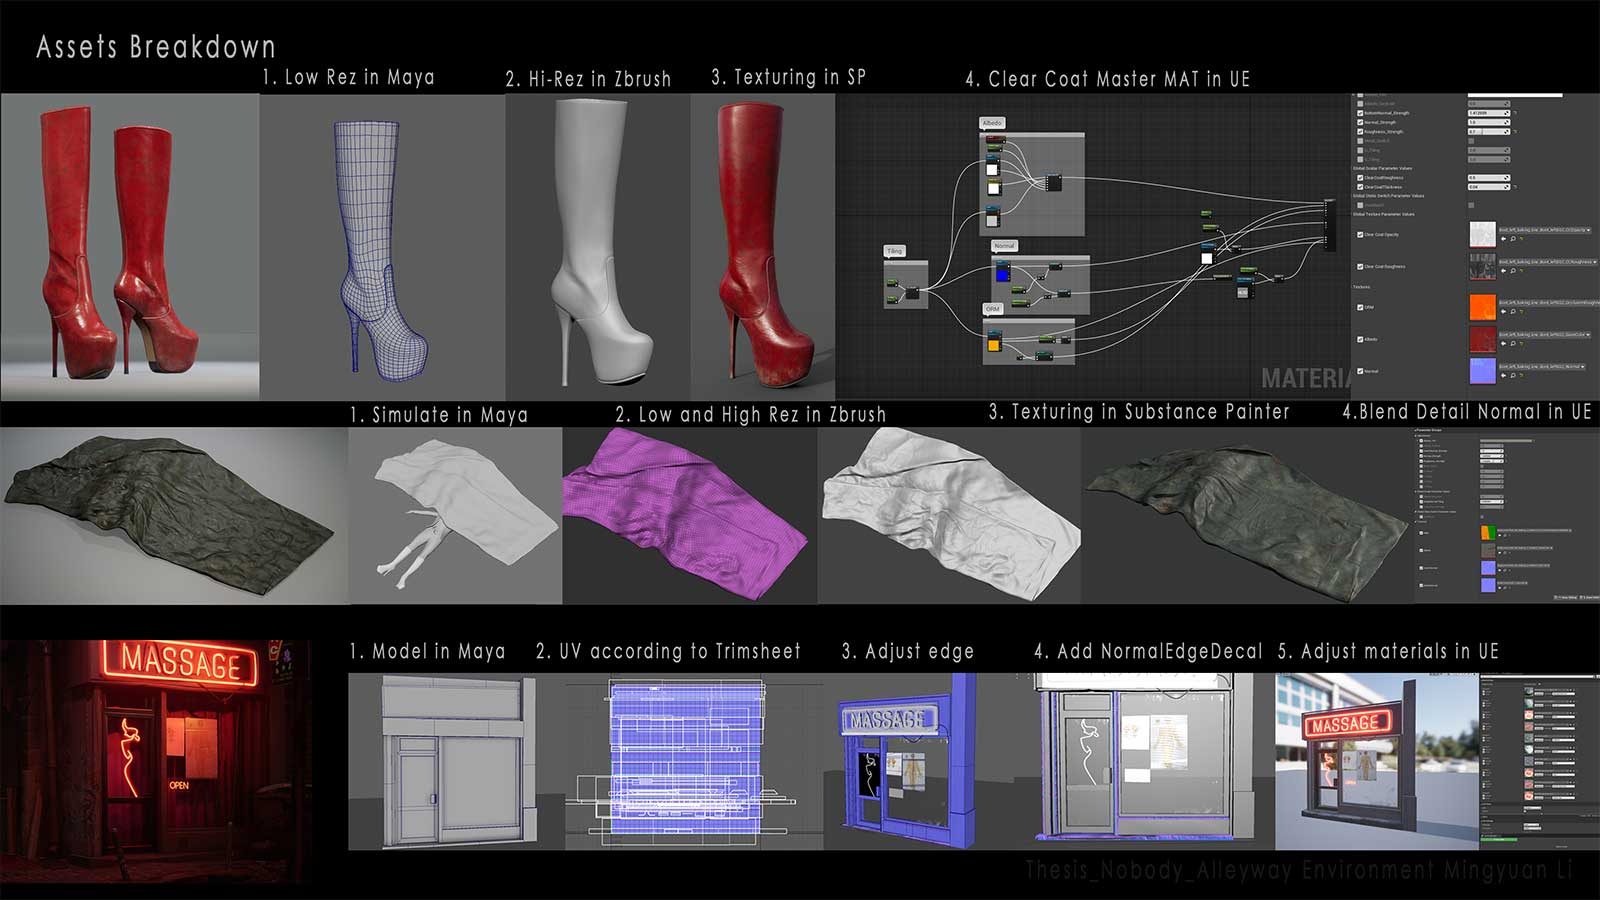 The process behind 3D modeling different kinds of assets.